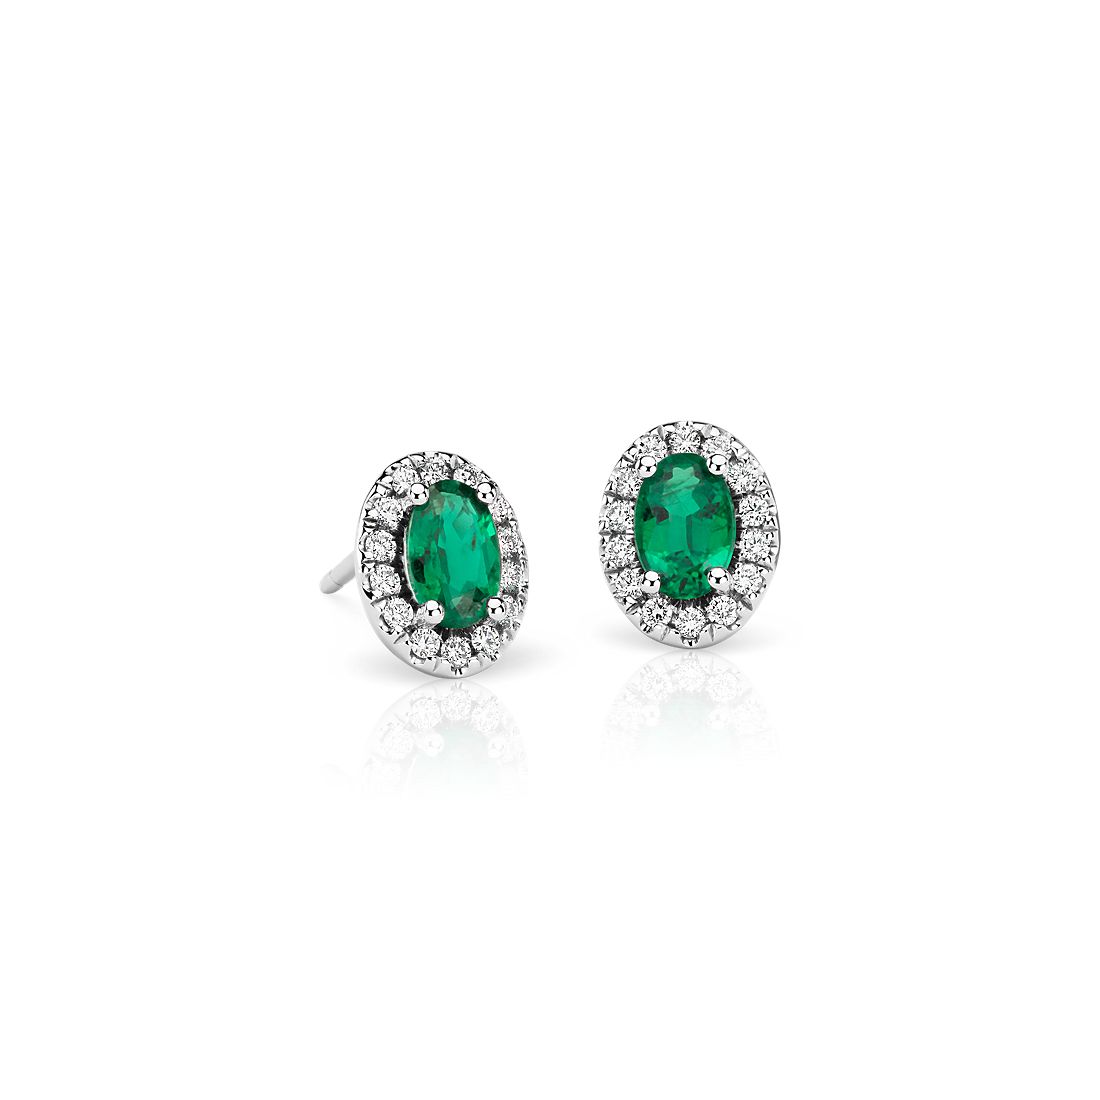 Emerald and Pavé Diamond Halo Earrings in 18k White Gold (6x4mm)